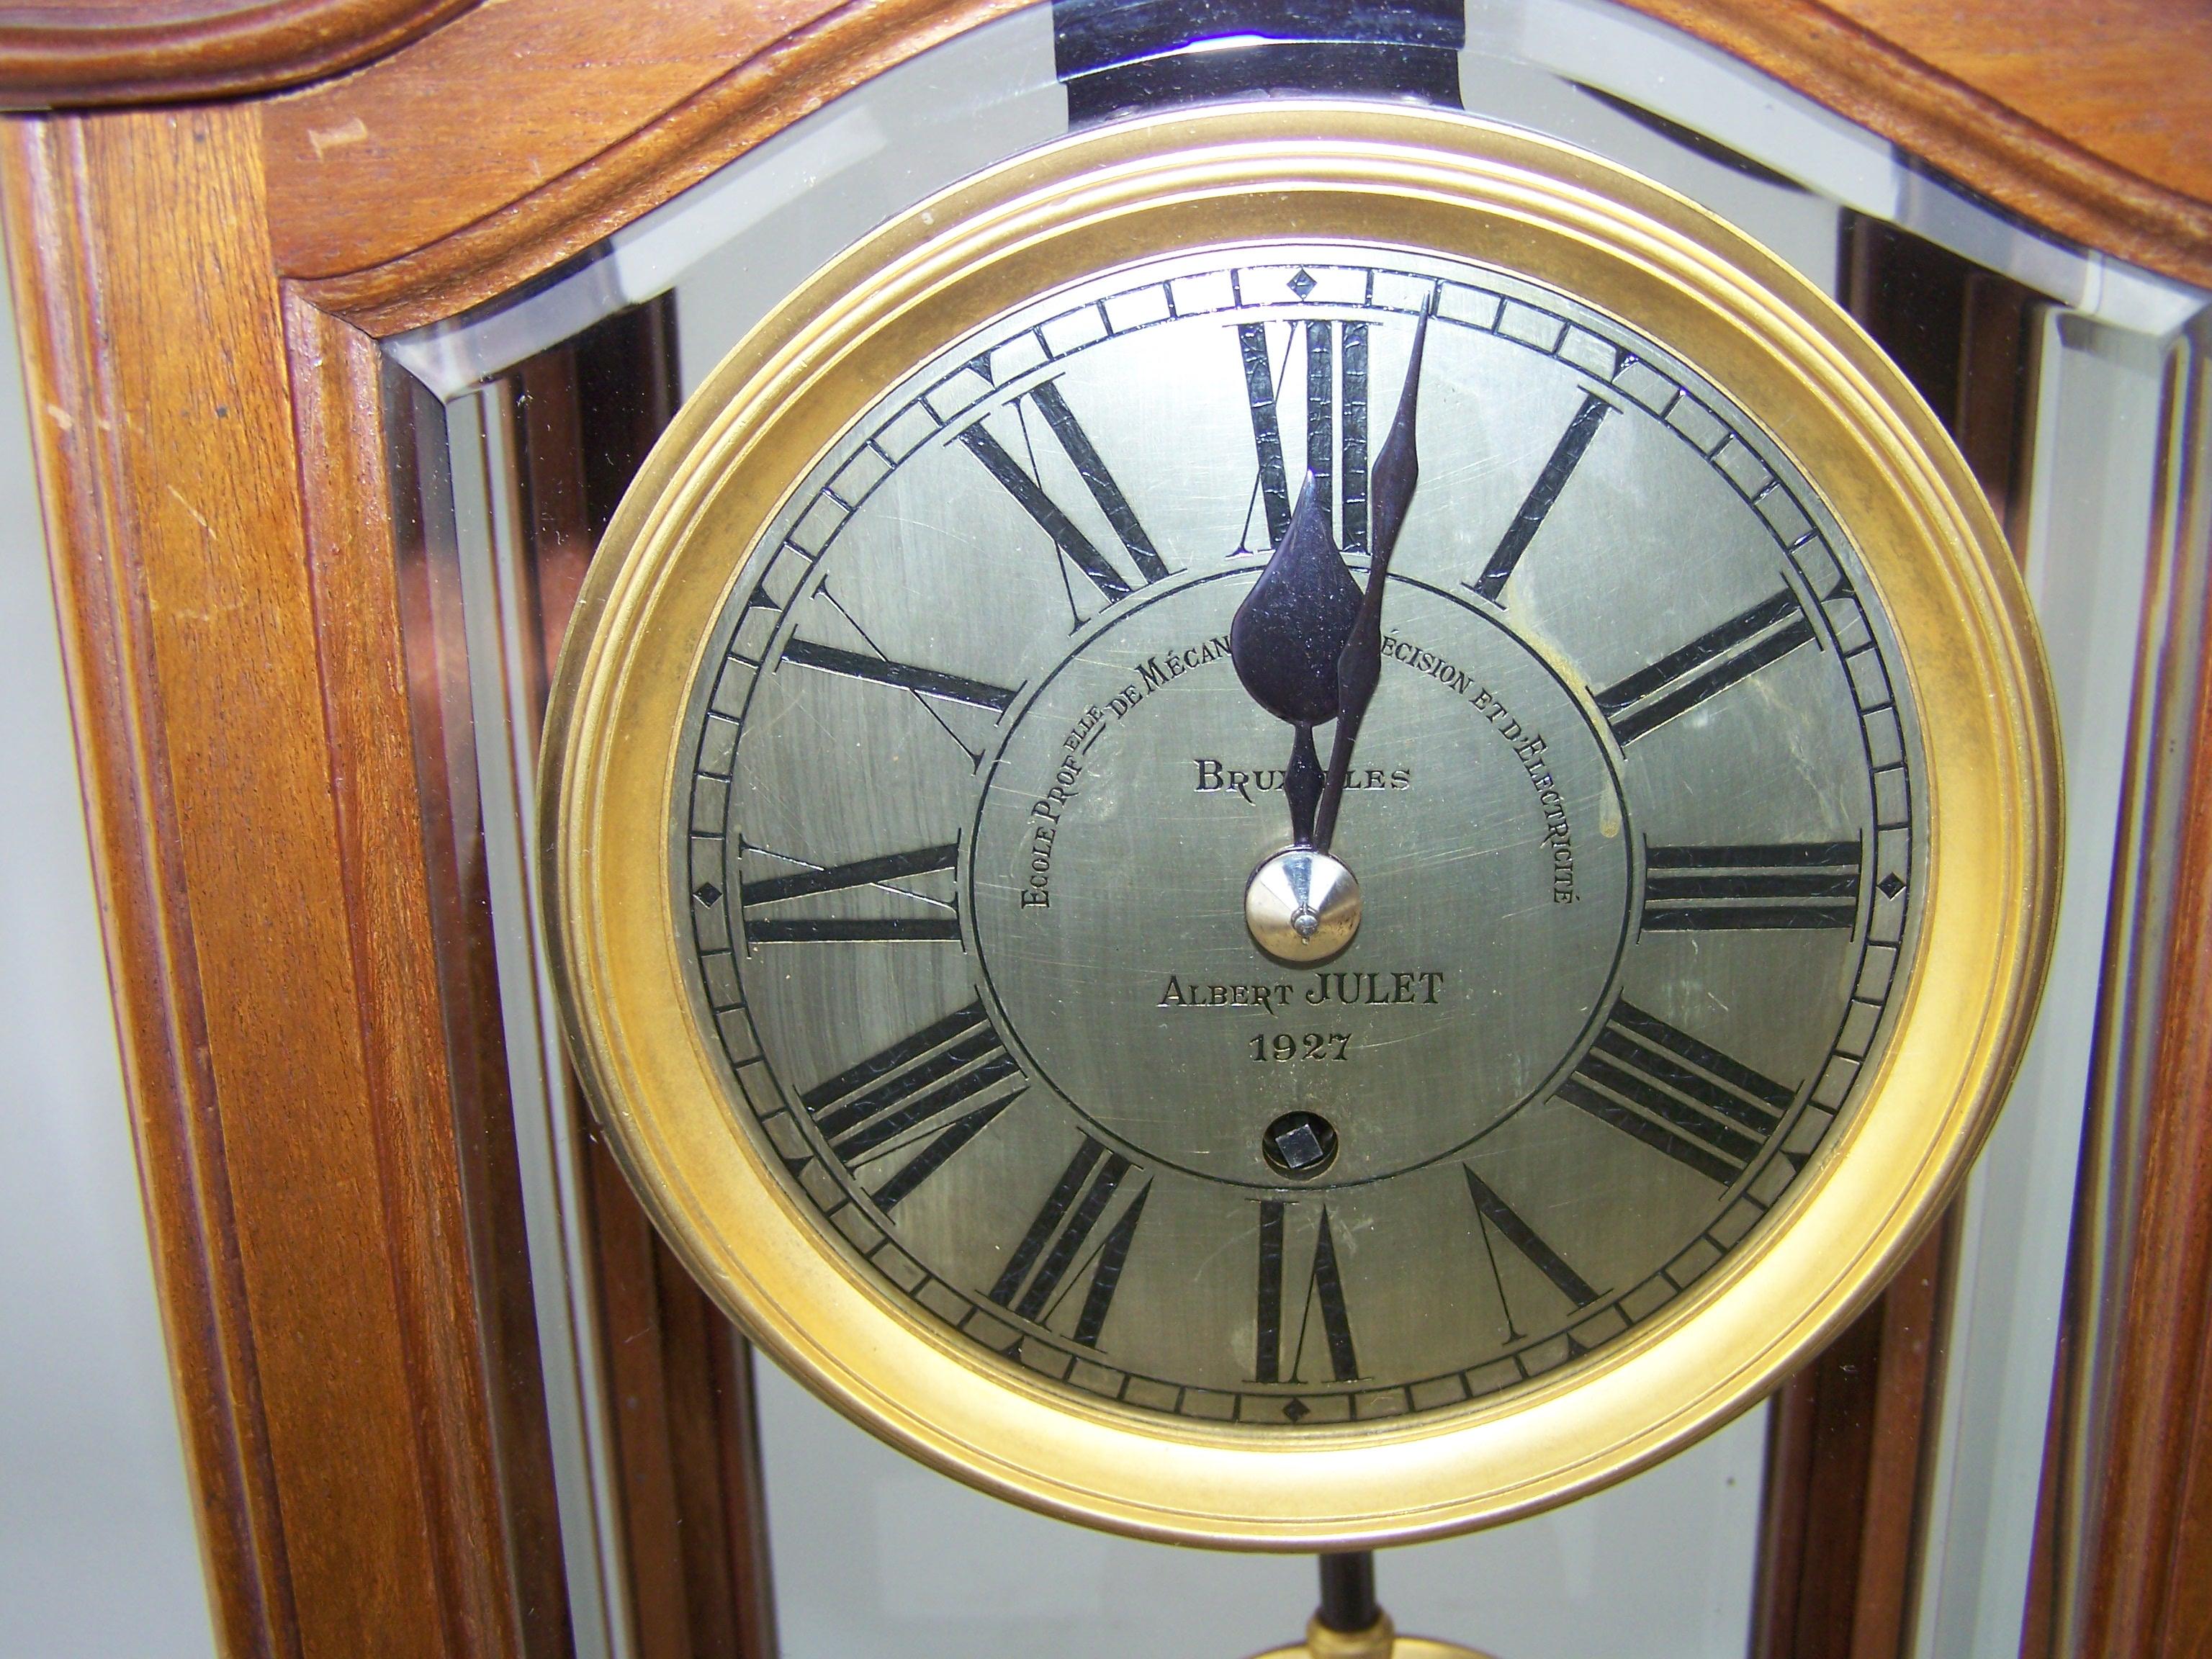 Very beautiful and rare clock from the Brussels school 